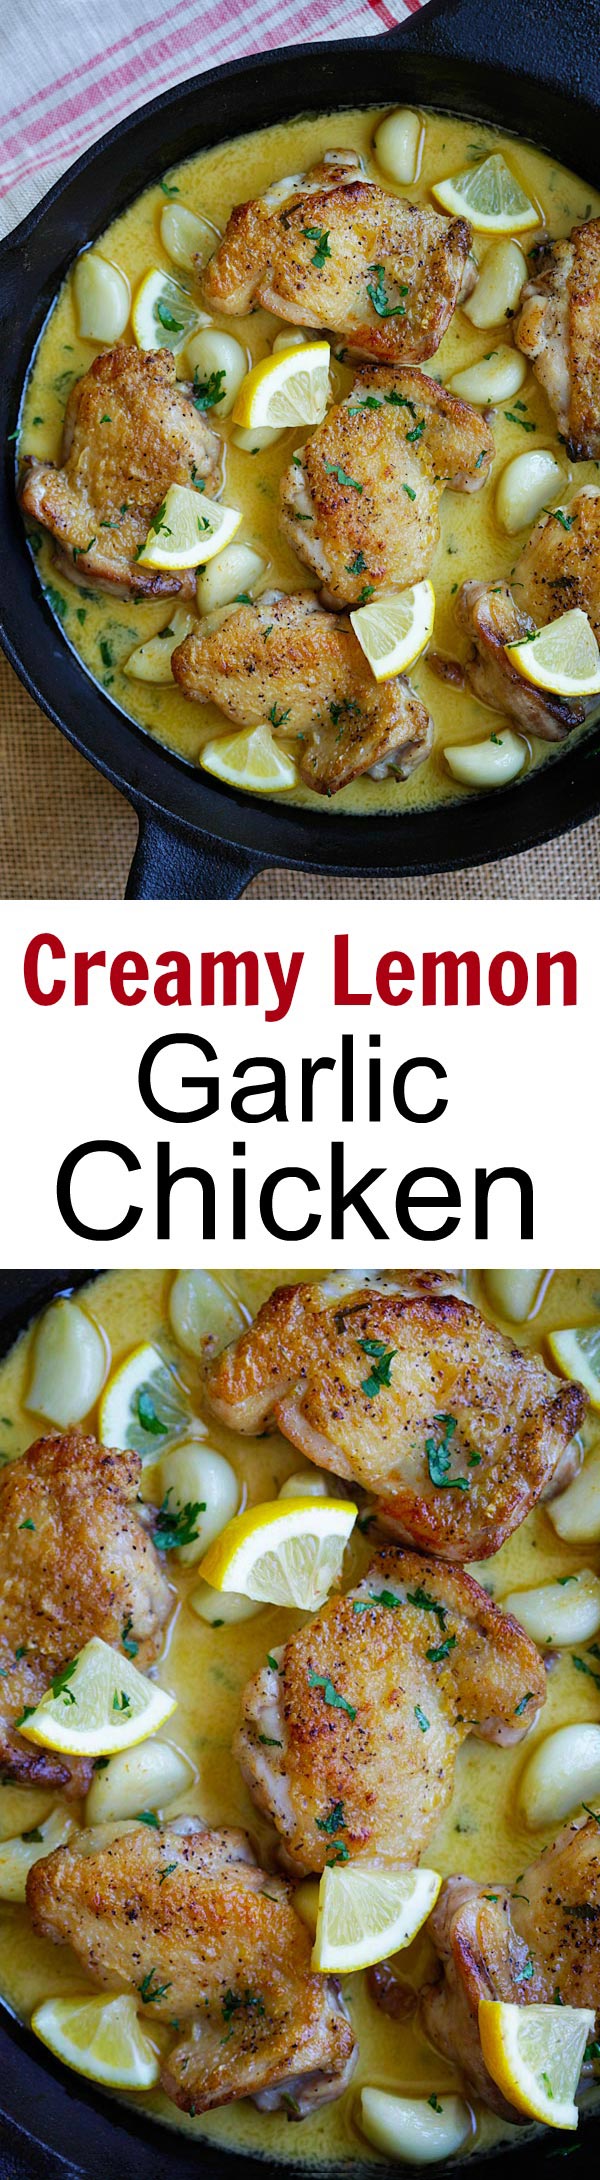 Creamy Lemon Garlic Chicken – crazy delicious skillet chicken with creamy lemon garlic sauce. So easy and dinner is ready in 20 mins | rasamalaysia.com